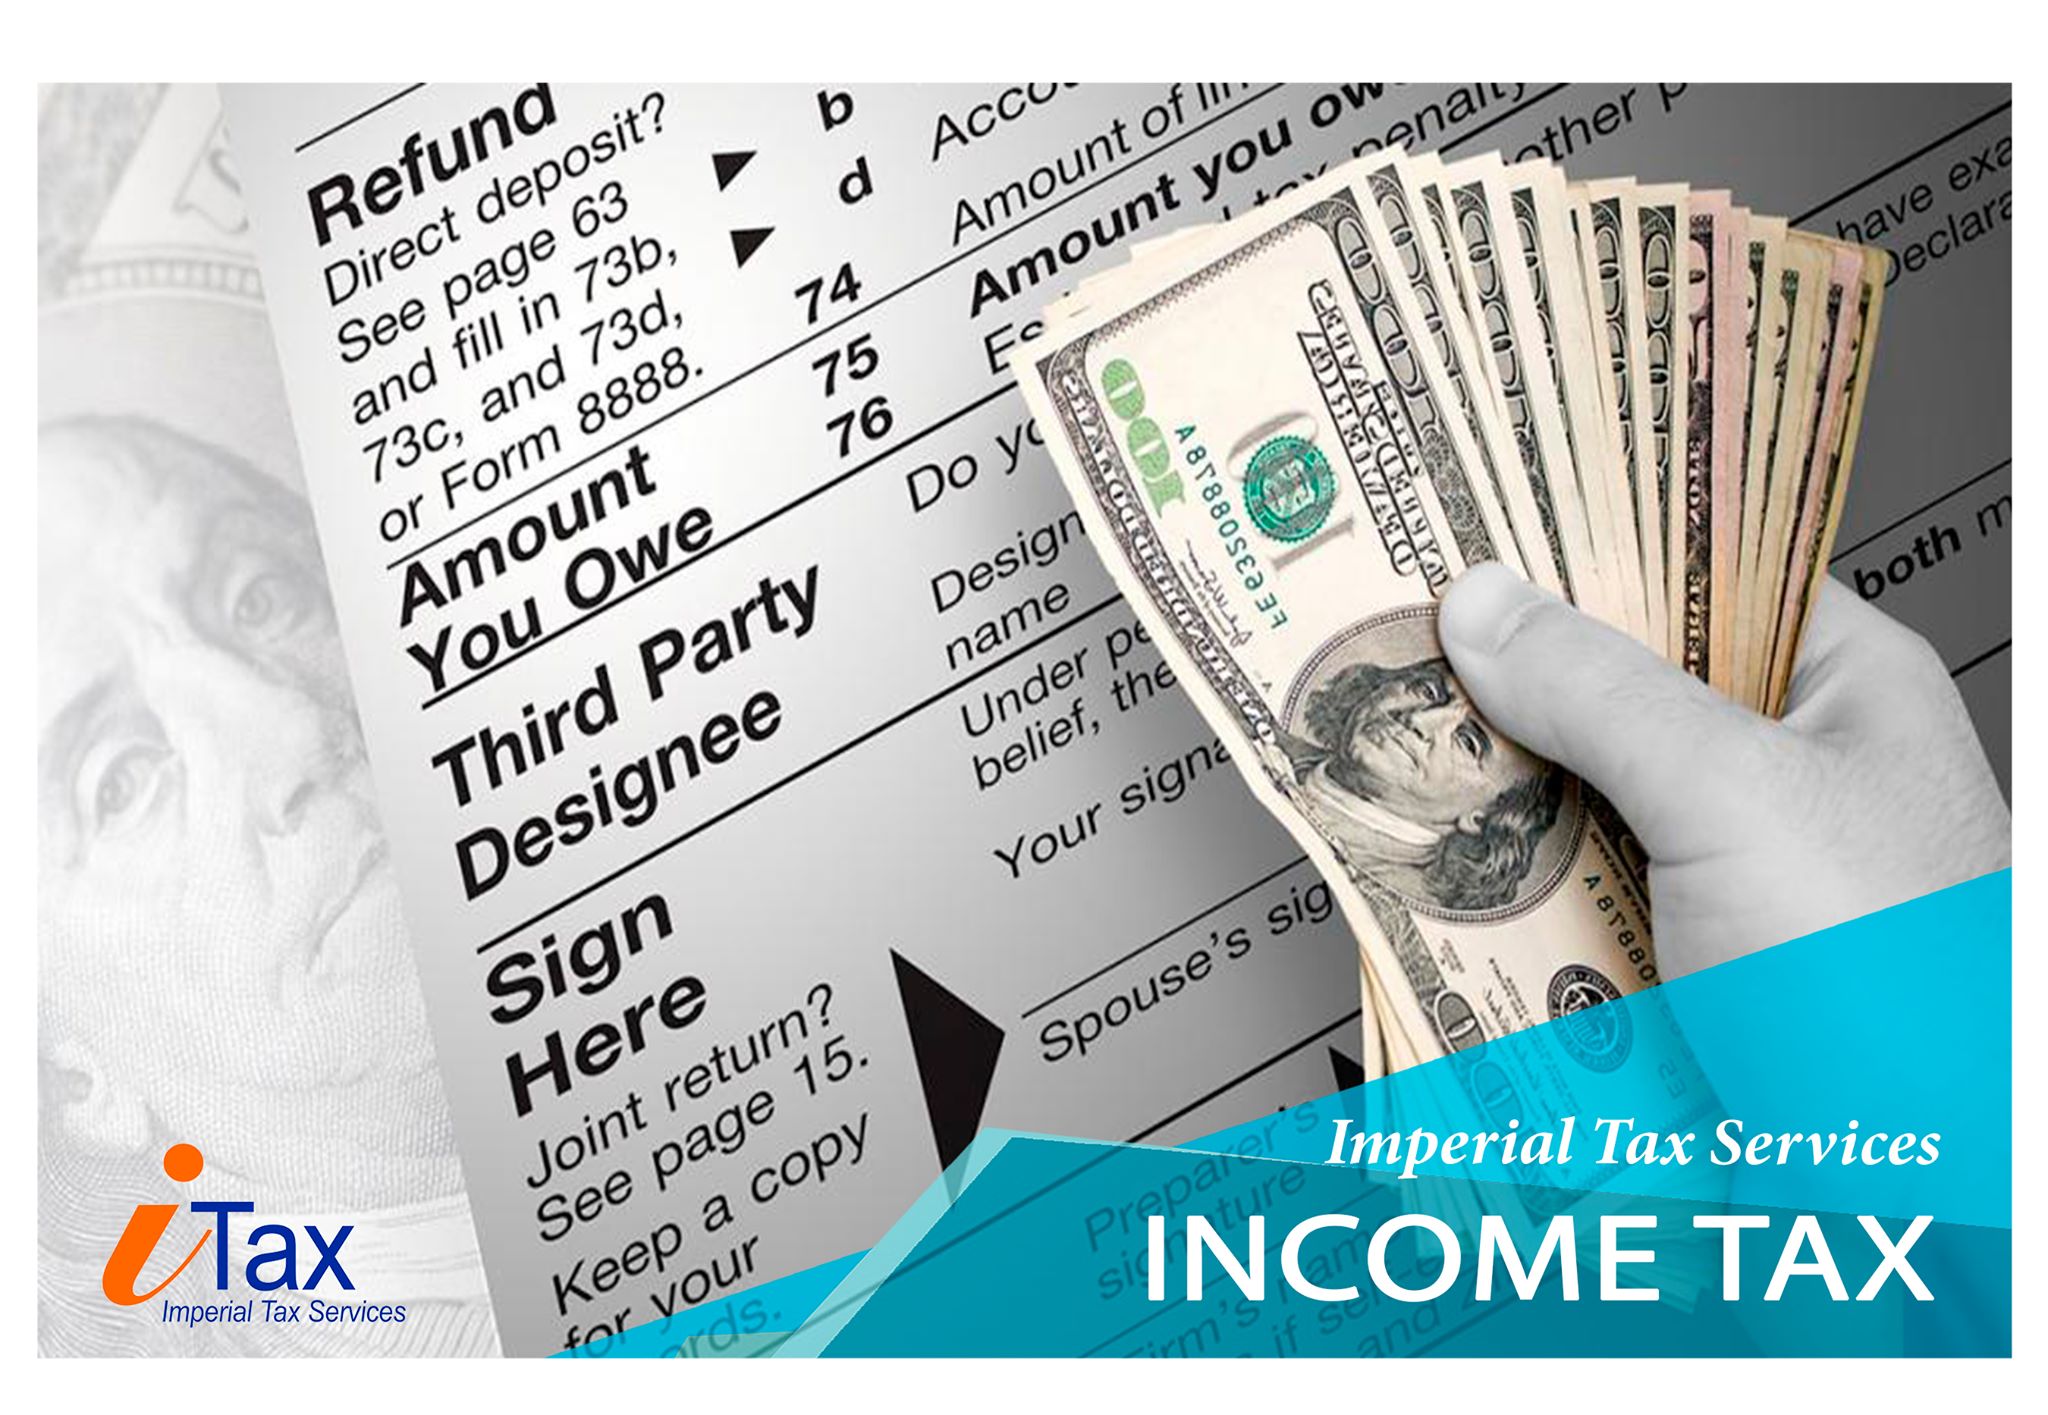 Imperial Tax Services 348 E 2nd St, Calexico California 92231